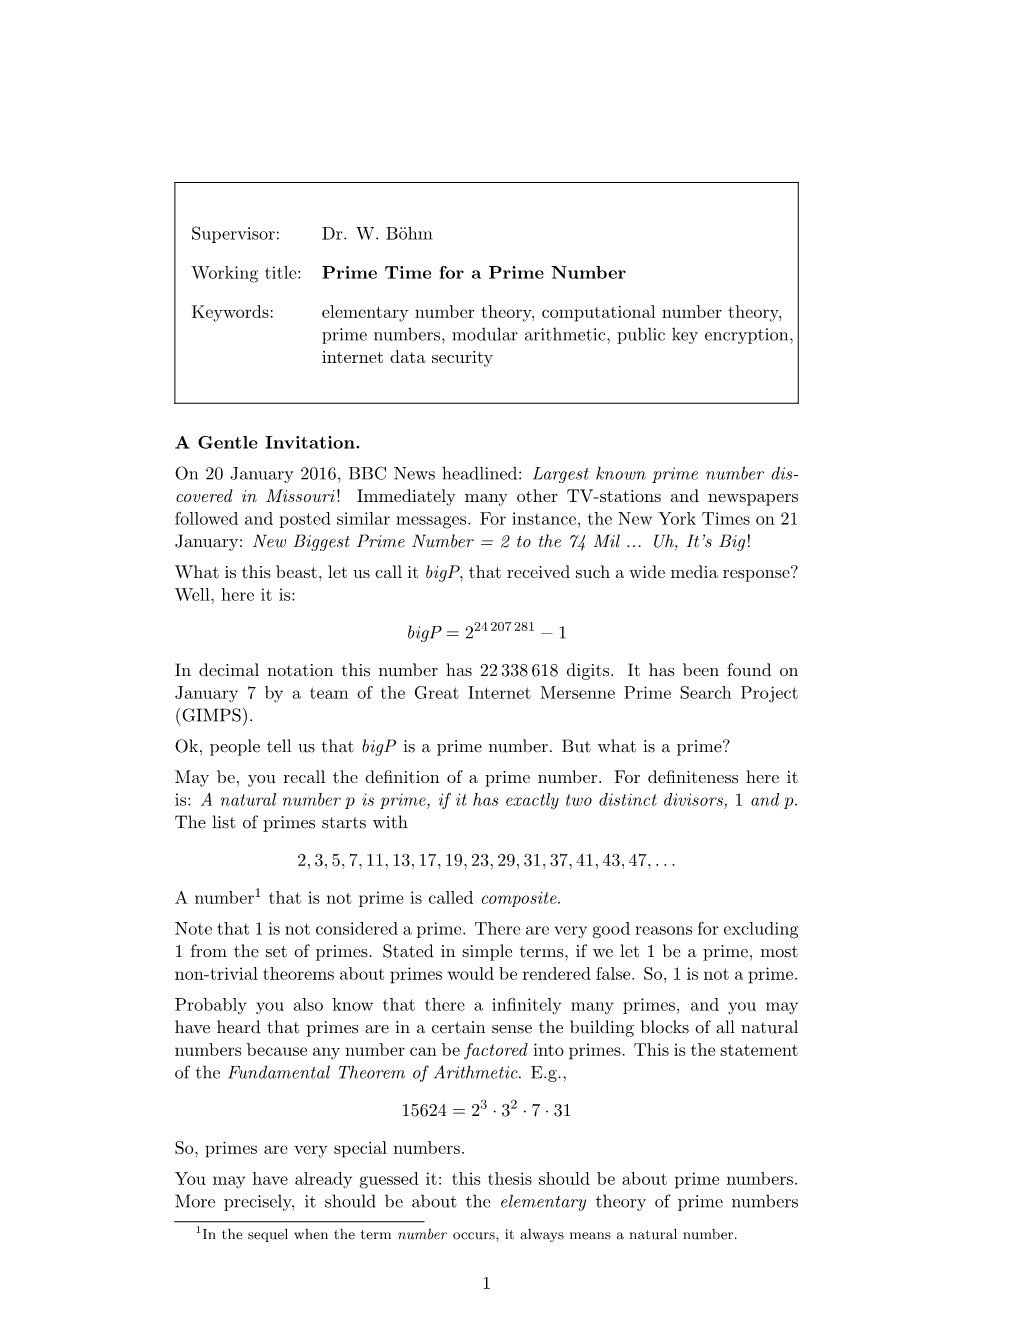 Supervisor: Dr. W. Böhm Working Title: Prime Time for a Prime Number Keywords: Elementary Number Theory, Computational Number T